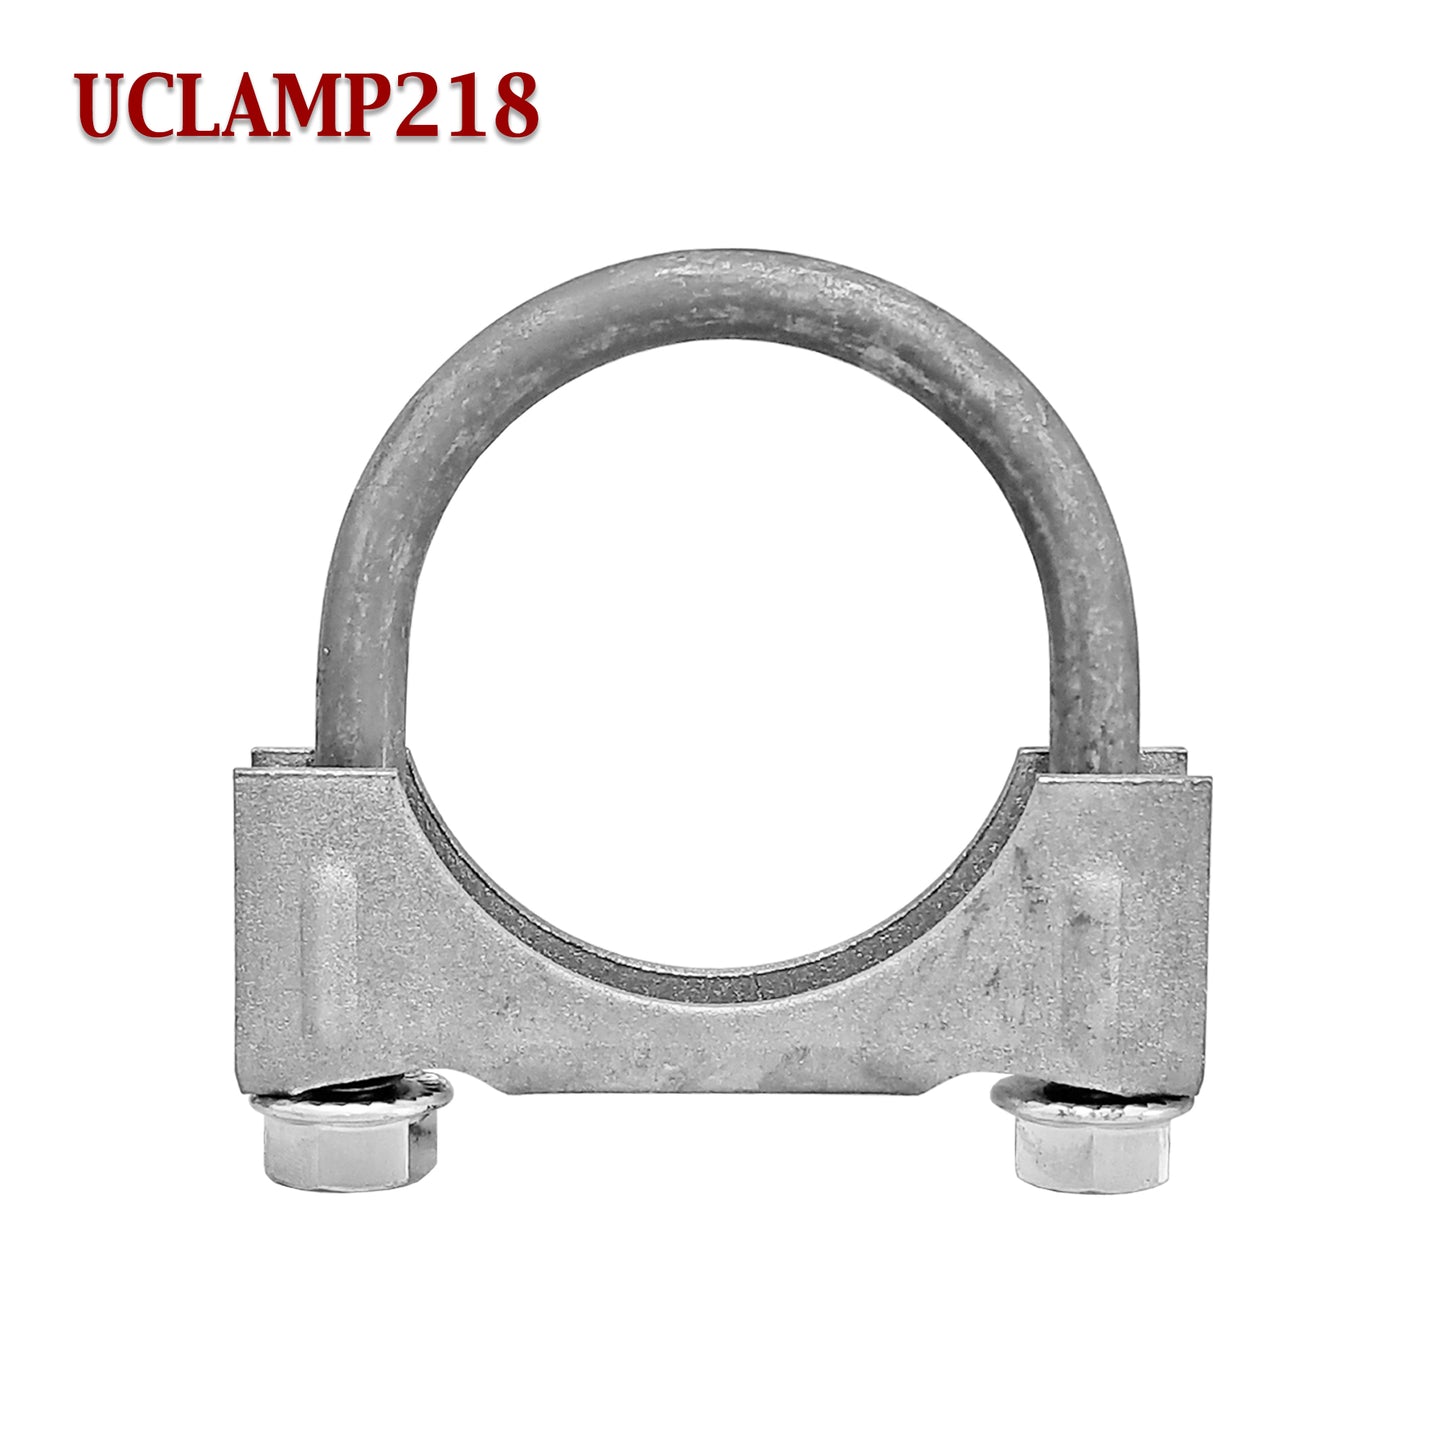 2 1/8" Exhaust Muffler Clamp U-Bolt Saddle Style For 2.125" Pipe 5/16" Rod